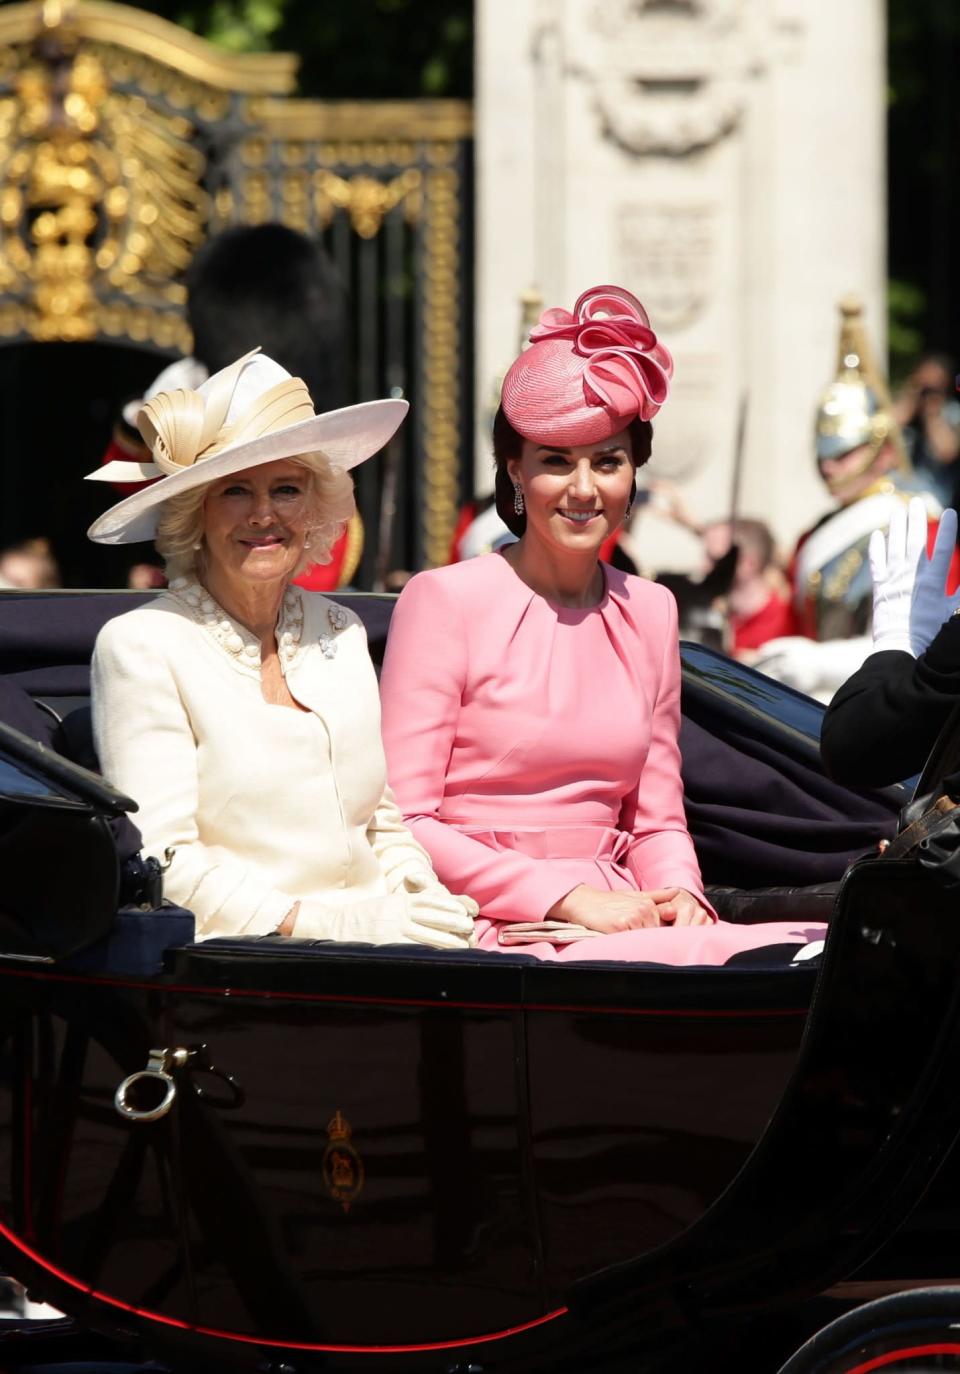 <p>Celebrating the Queen’s 91st birthday, Kate chose a summery pink dress by Alexander McQueen for the 2017 Trooping the Colour. The long-sleeved design had been customised from a sleeveless version and featured ruched detailing at the waist. Requiring a matching hat for any formal occasion, she chose a sculptural style by Jane Taylor.<br><i>[Photo: PA]</i> </p>